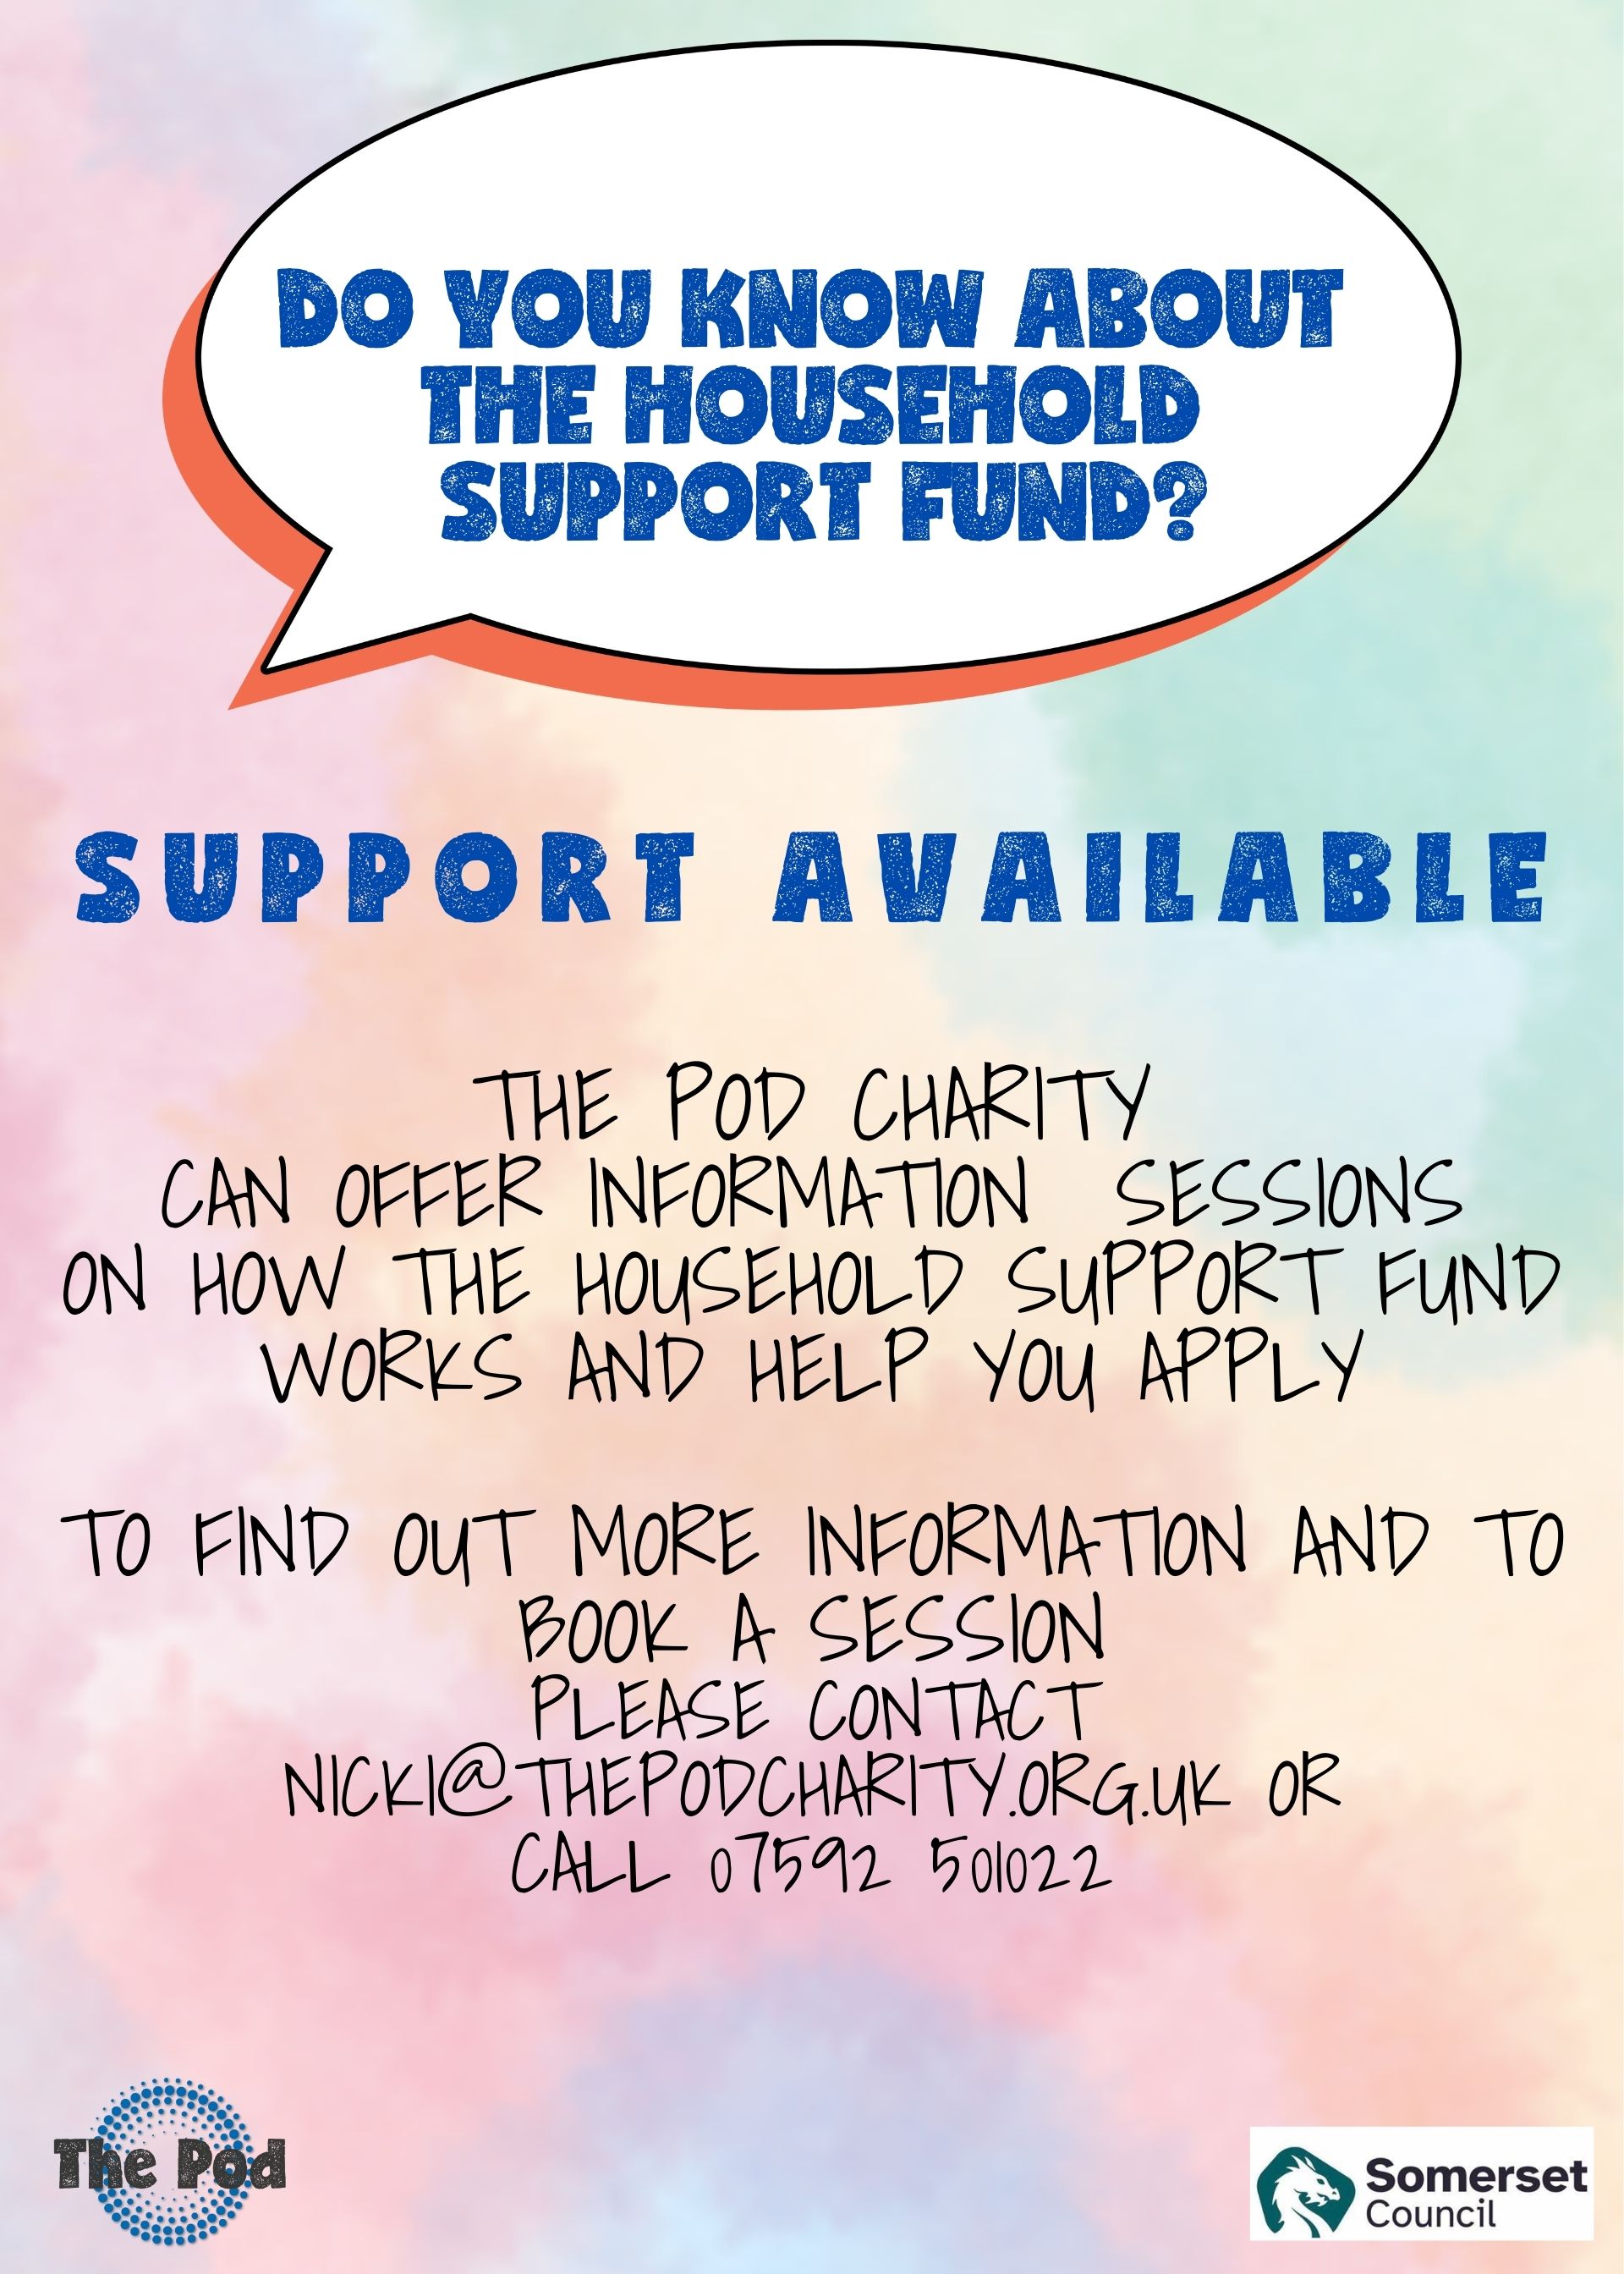 Where to get help, image The Pod Charity